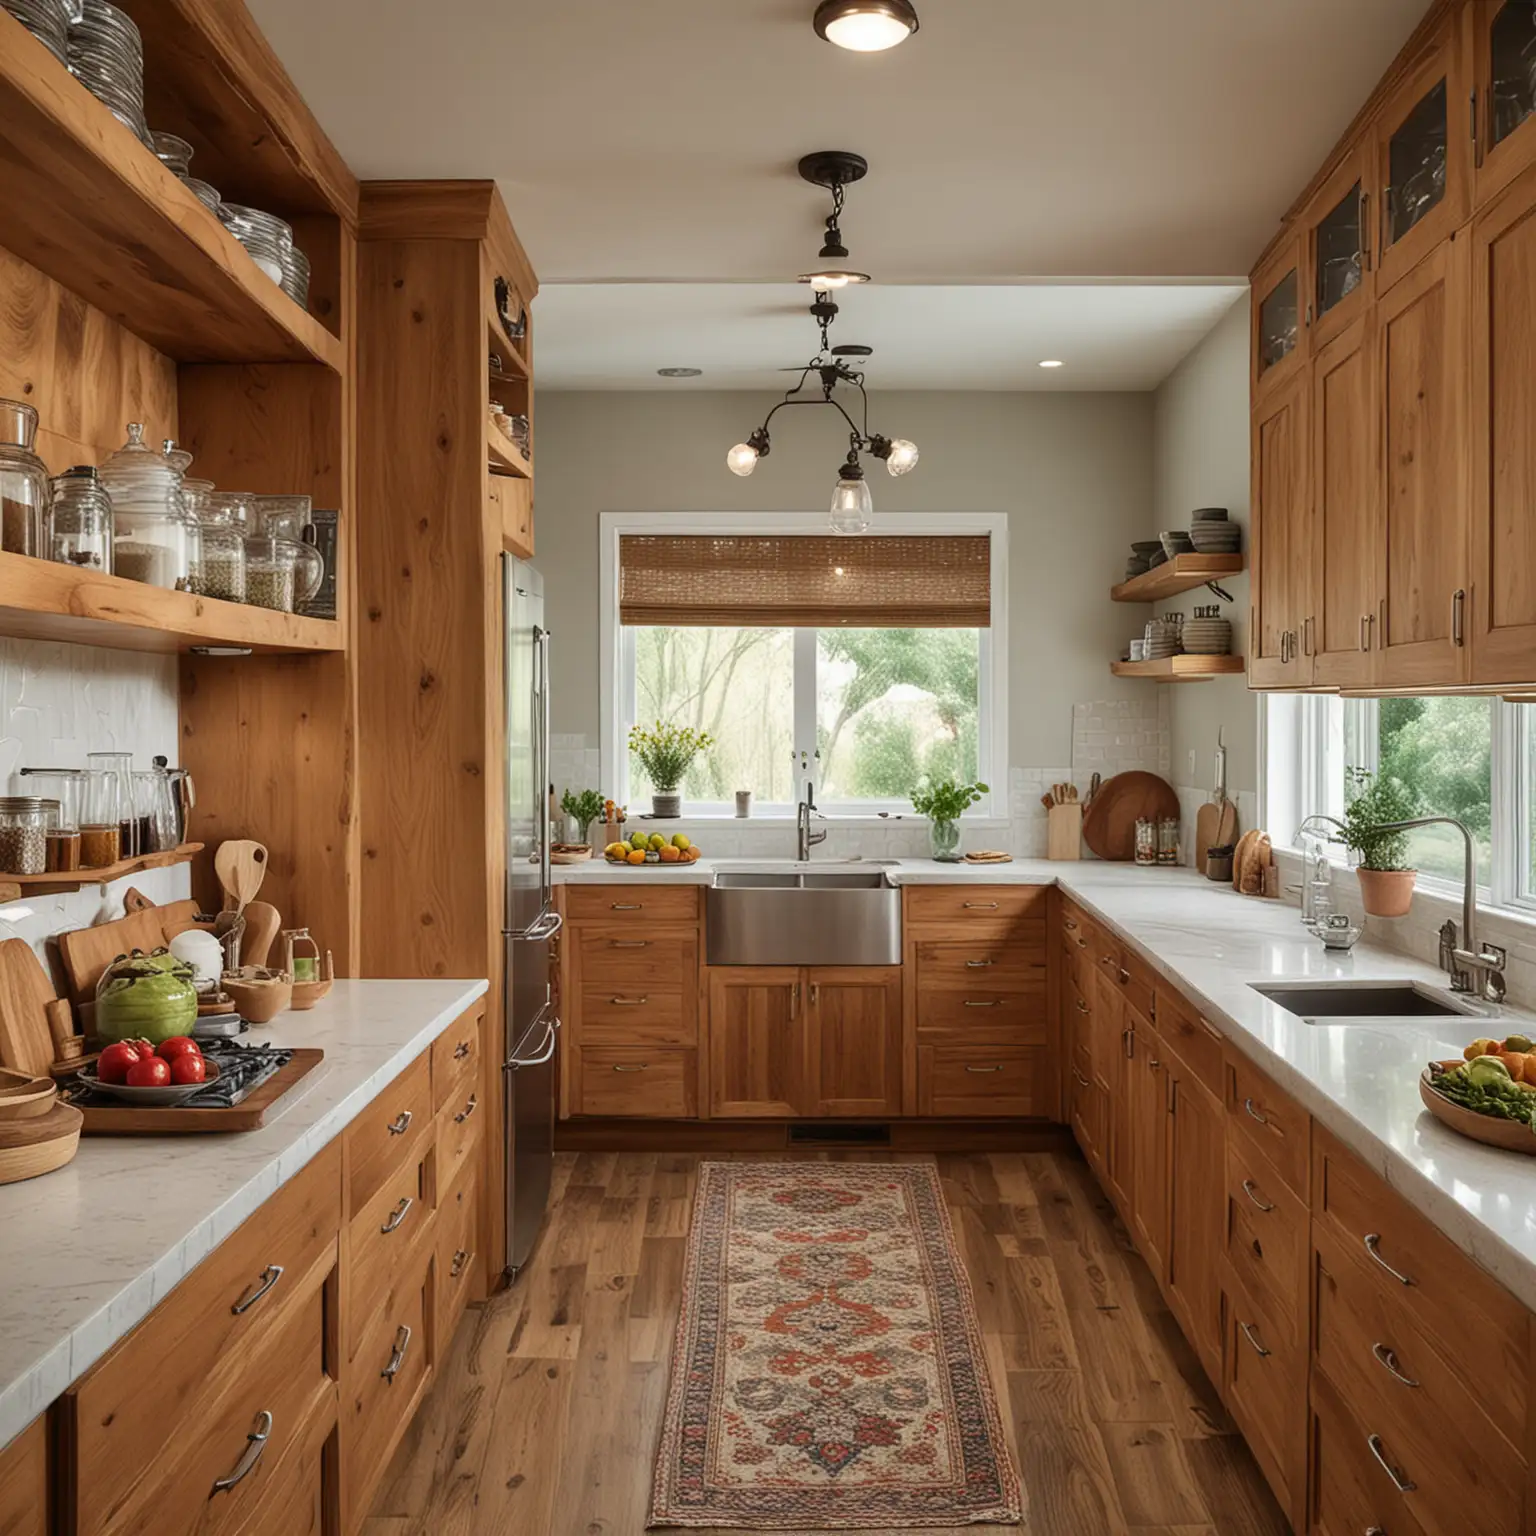 Modern-Kitchen-Design-with-Wooden-Cabinets-and-Galley-Style-Layout